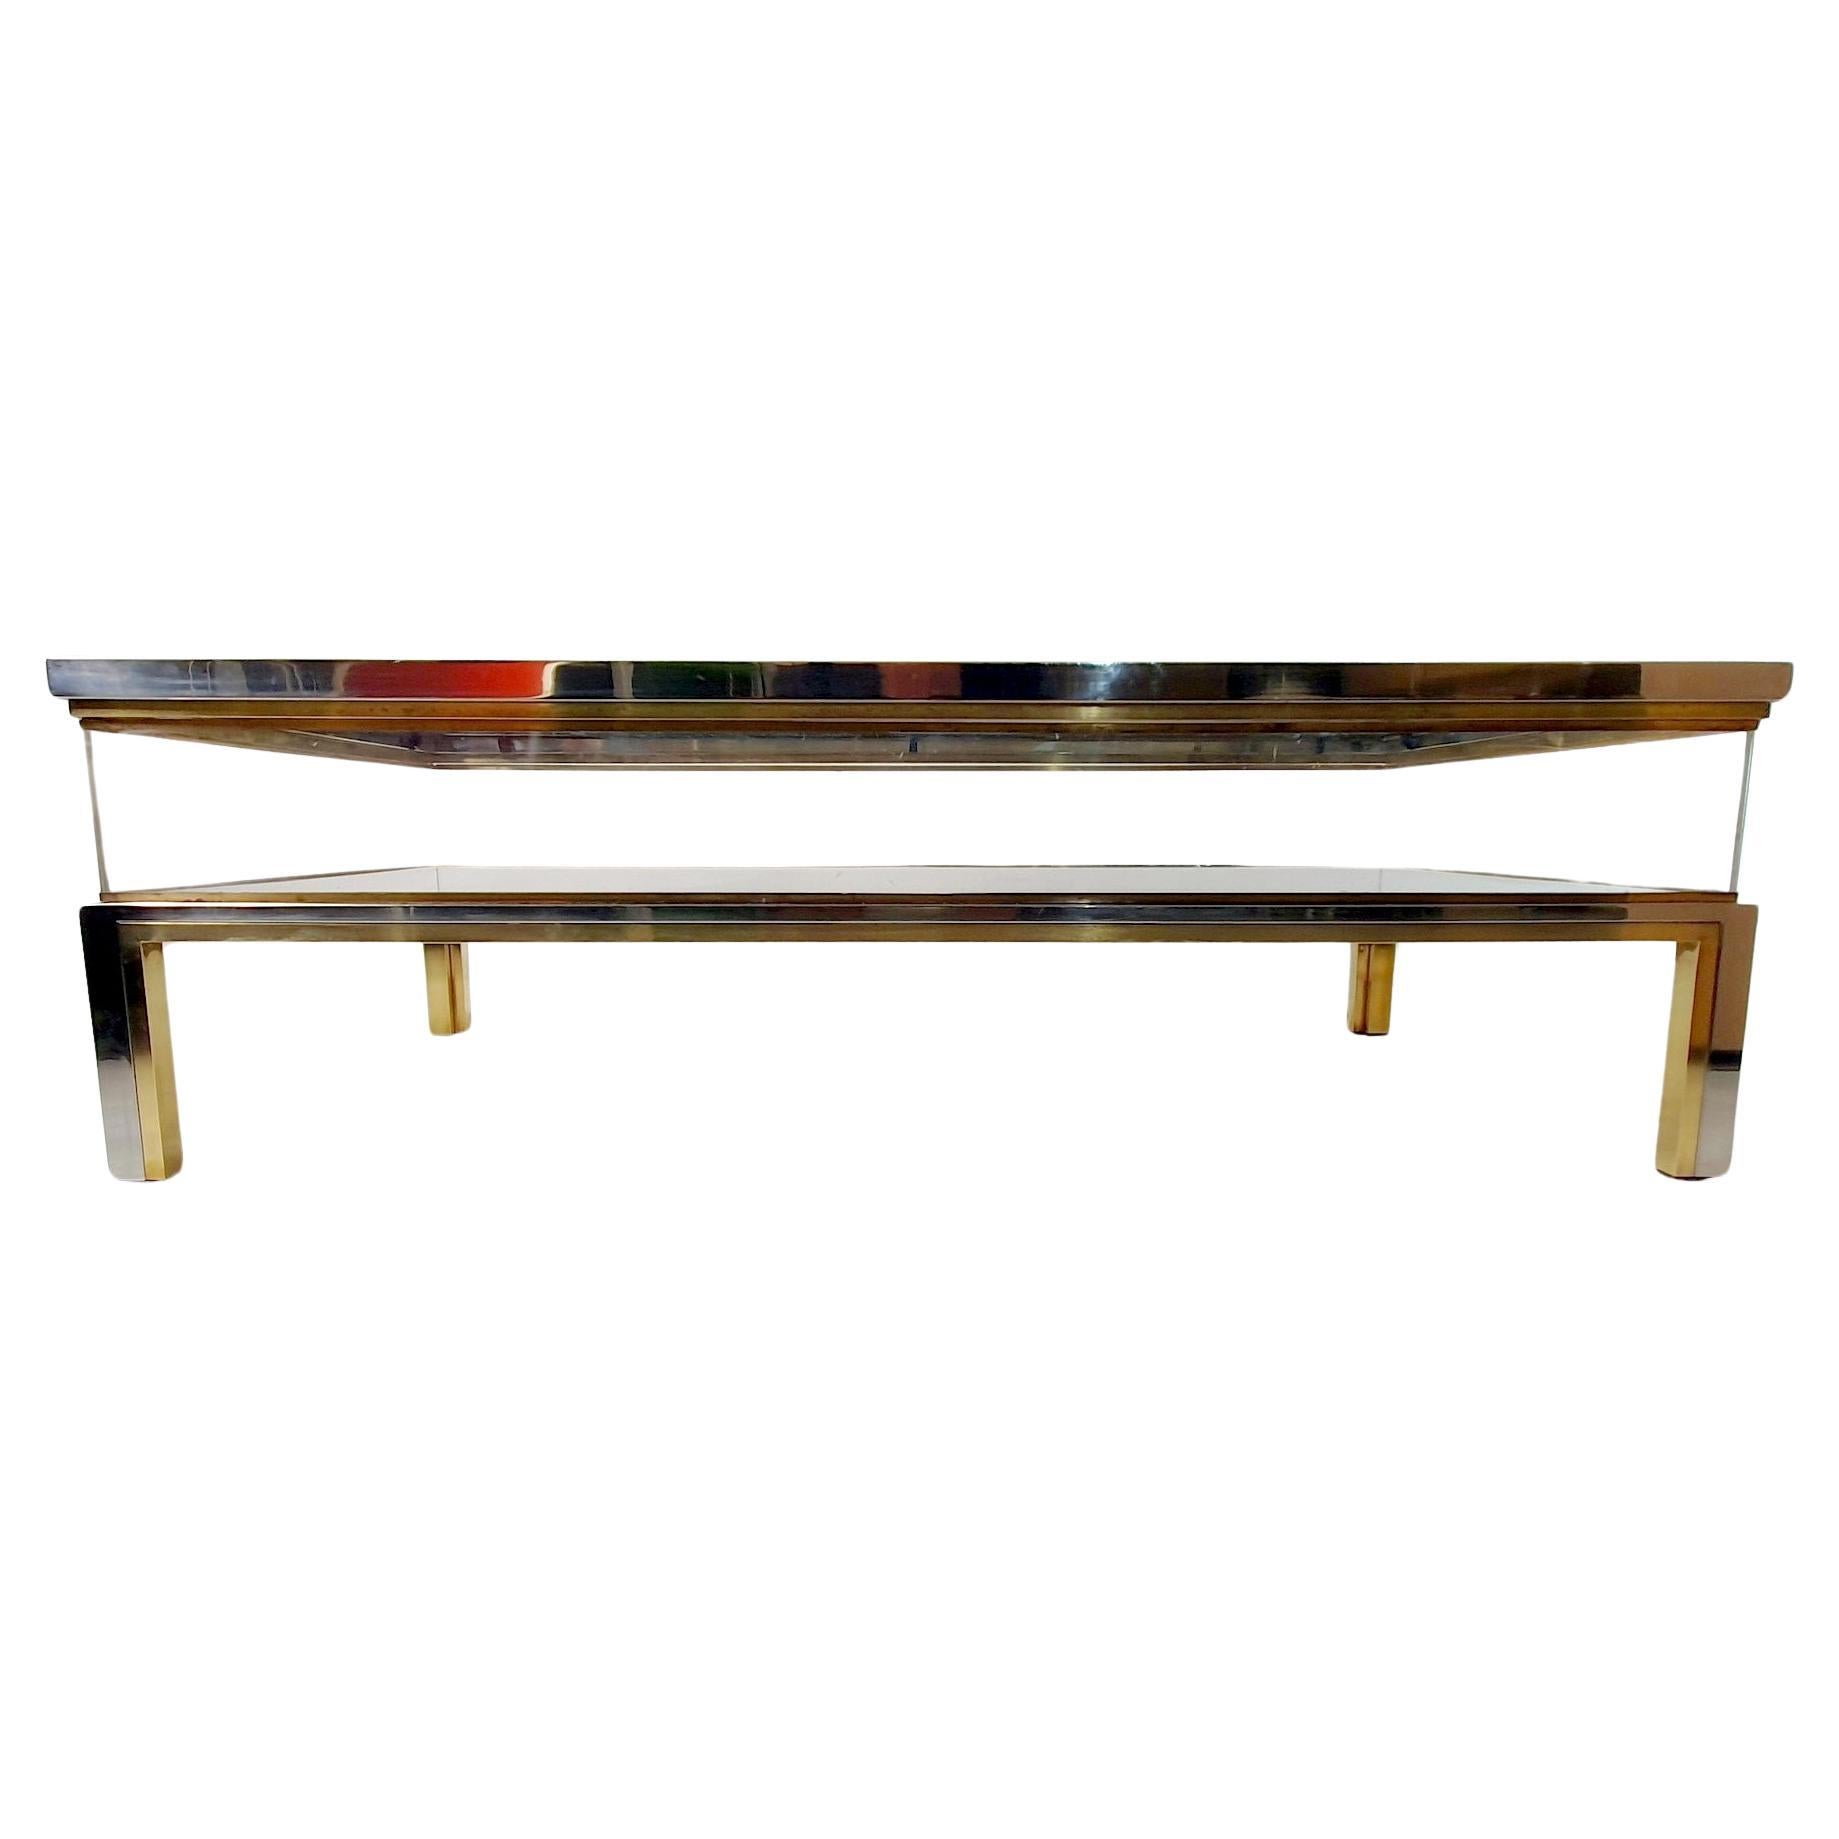 A lovely display coffee table attributed to Maison Jansen, France, circa 1970. The chrome and brass table known as a “vitrine“coffee table and it is one of the more iconic designs from the 1970'sby the famous french manufacturer. The upper level